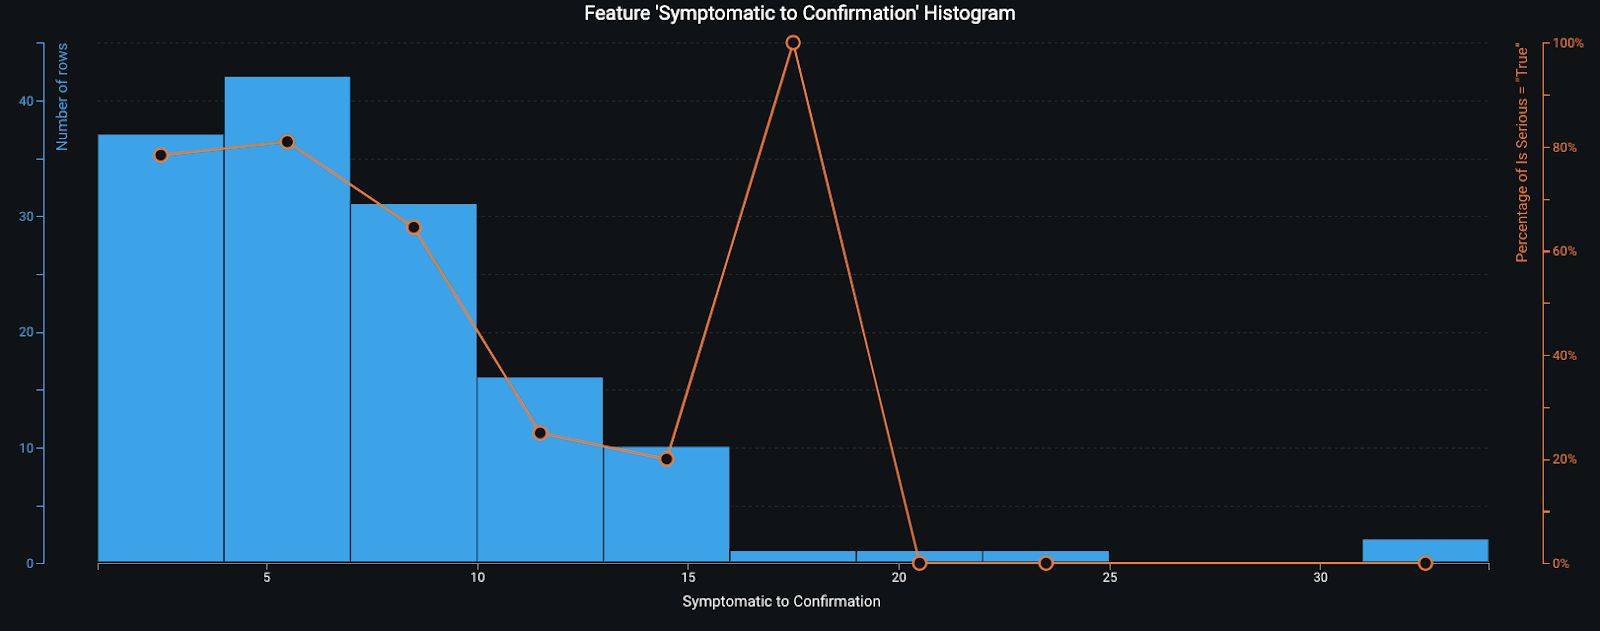 Feature Symptomatic to Confirmation Histogram